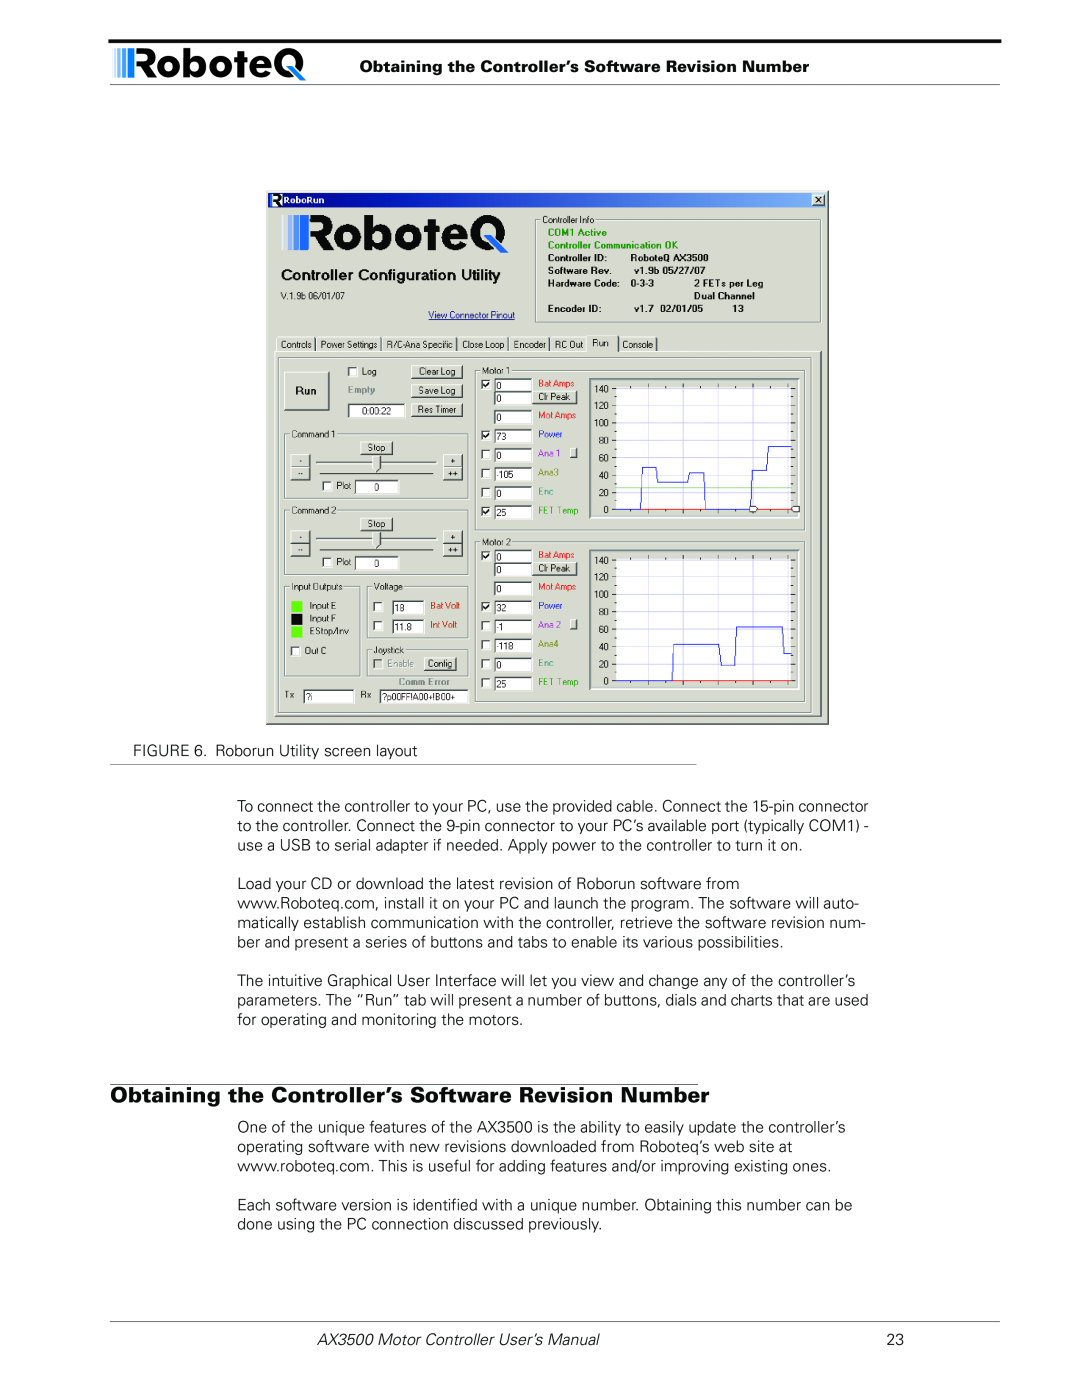 RoboteQ user manual Obtaining the Controller’s Software Revision Number, AX3500 Motor Controller User’s Manual 